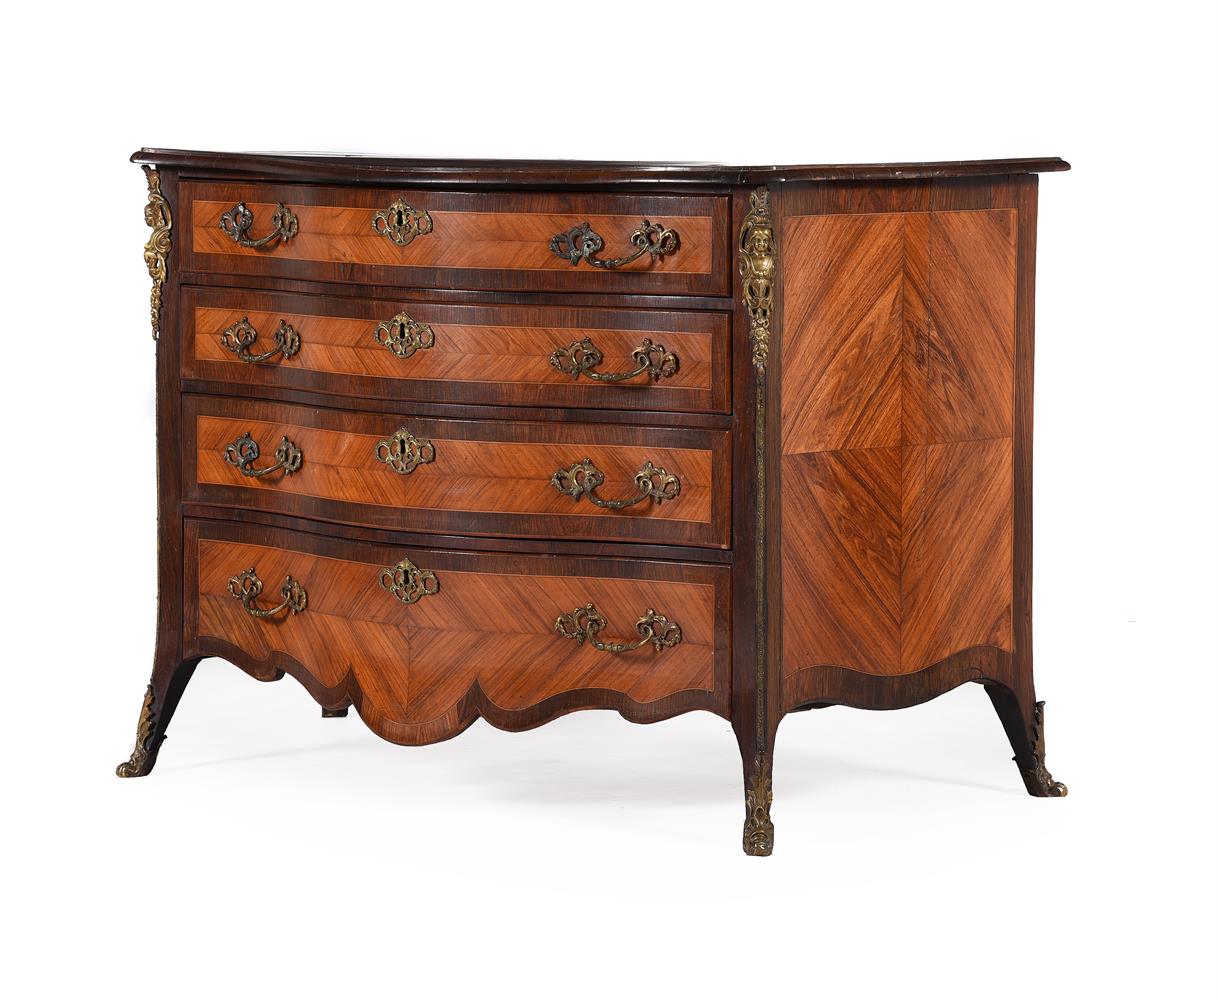 Y A GEORGE III TULIPWOOD AND AMARANTH CROSSBANDED SERPENTINE COMMODE, ATTRIBUTED TO PIERRE LANGLOIS - Image 2 of 9